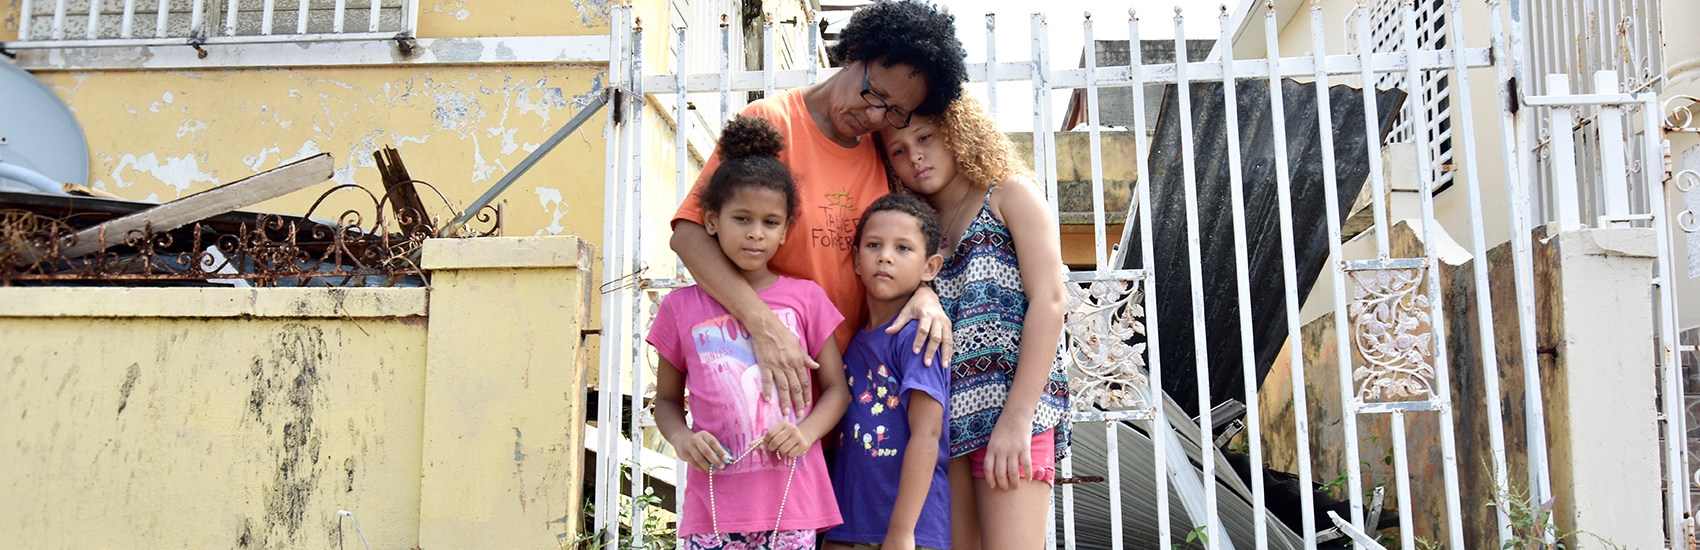 A grandmother embraces three of her grandchildren amid debris and rubble caused by Hurricane Maria.